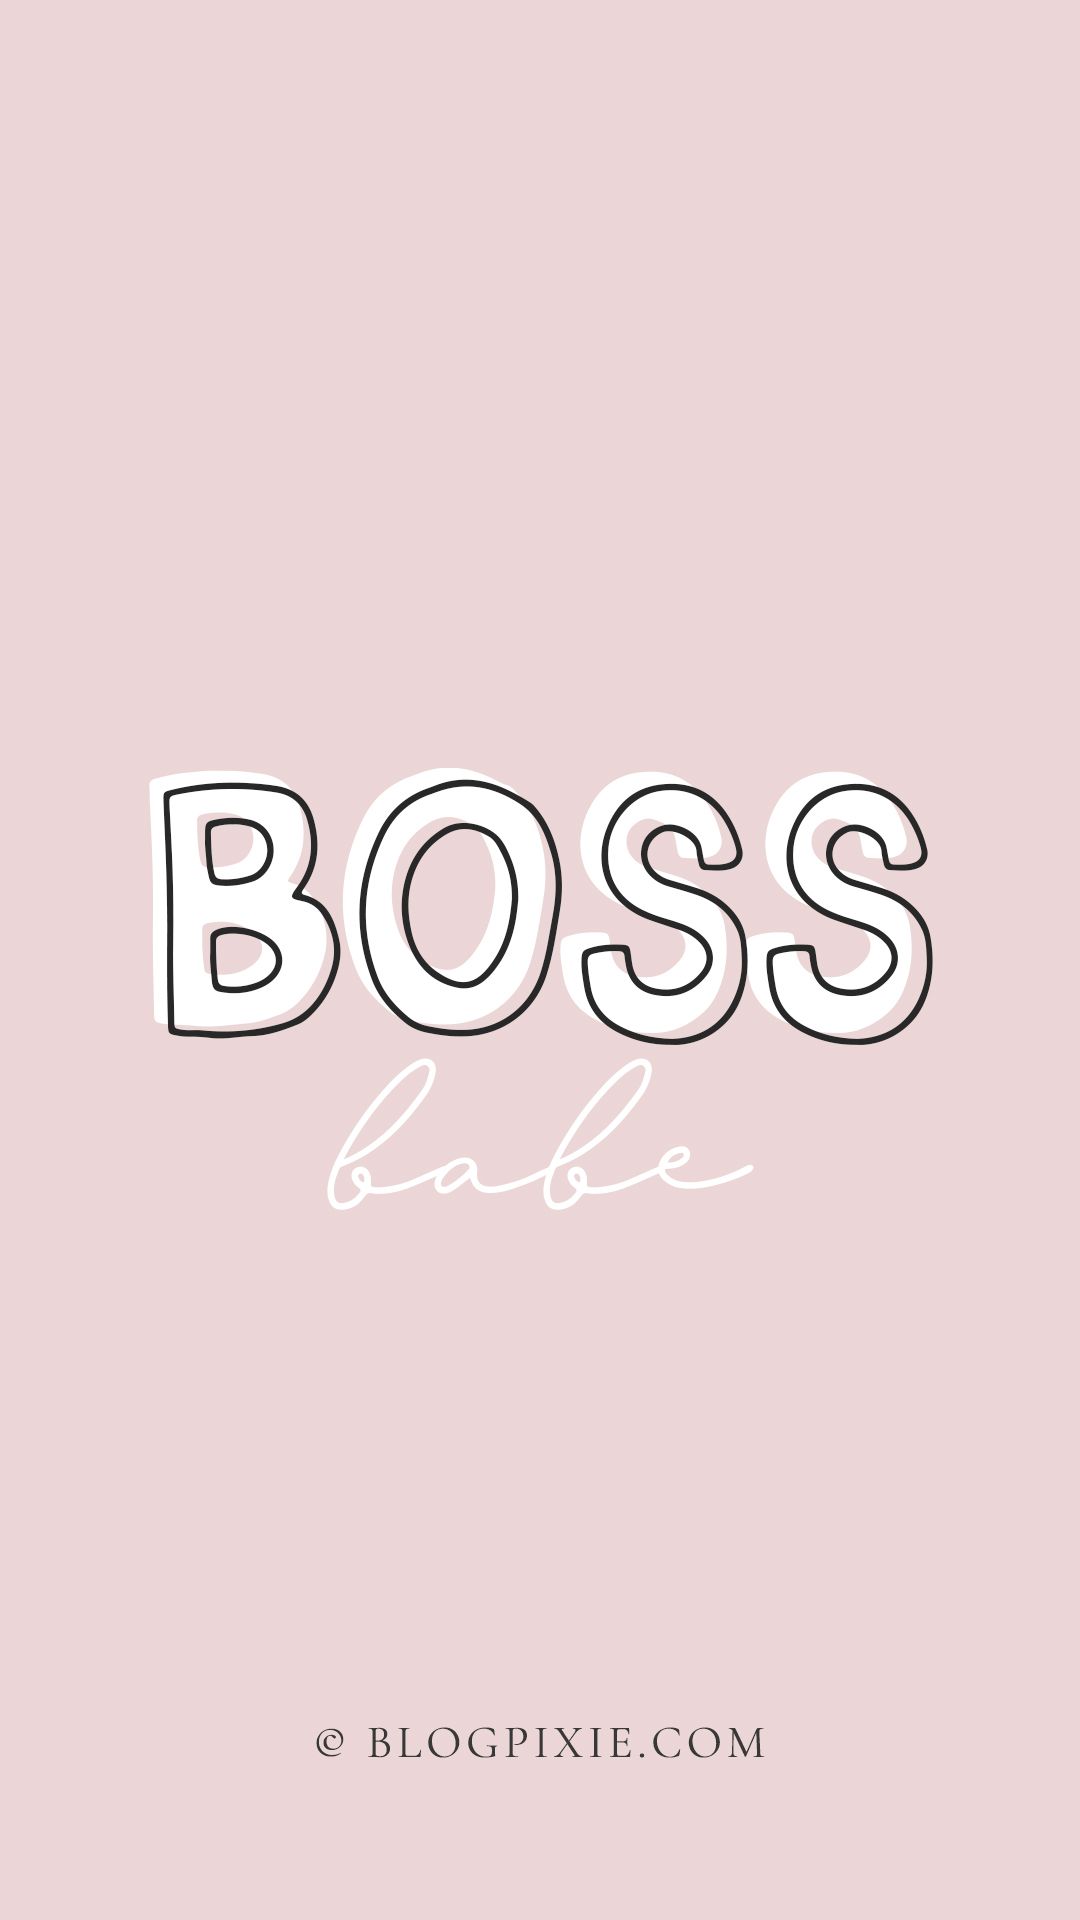 Top more than 60 boss babe wallpaper - in.cdgdbentre